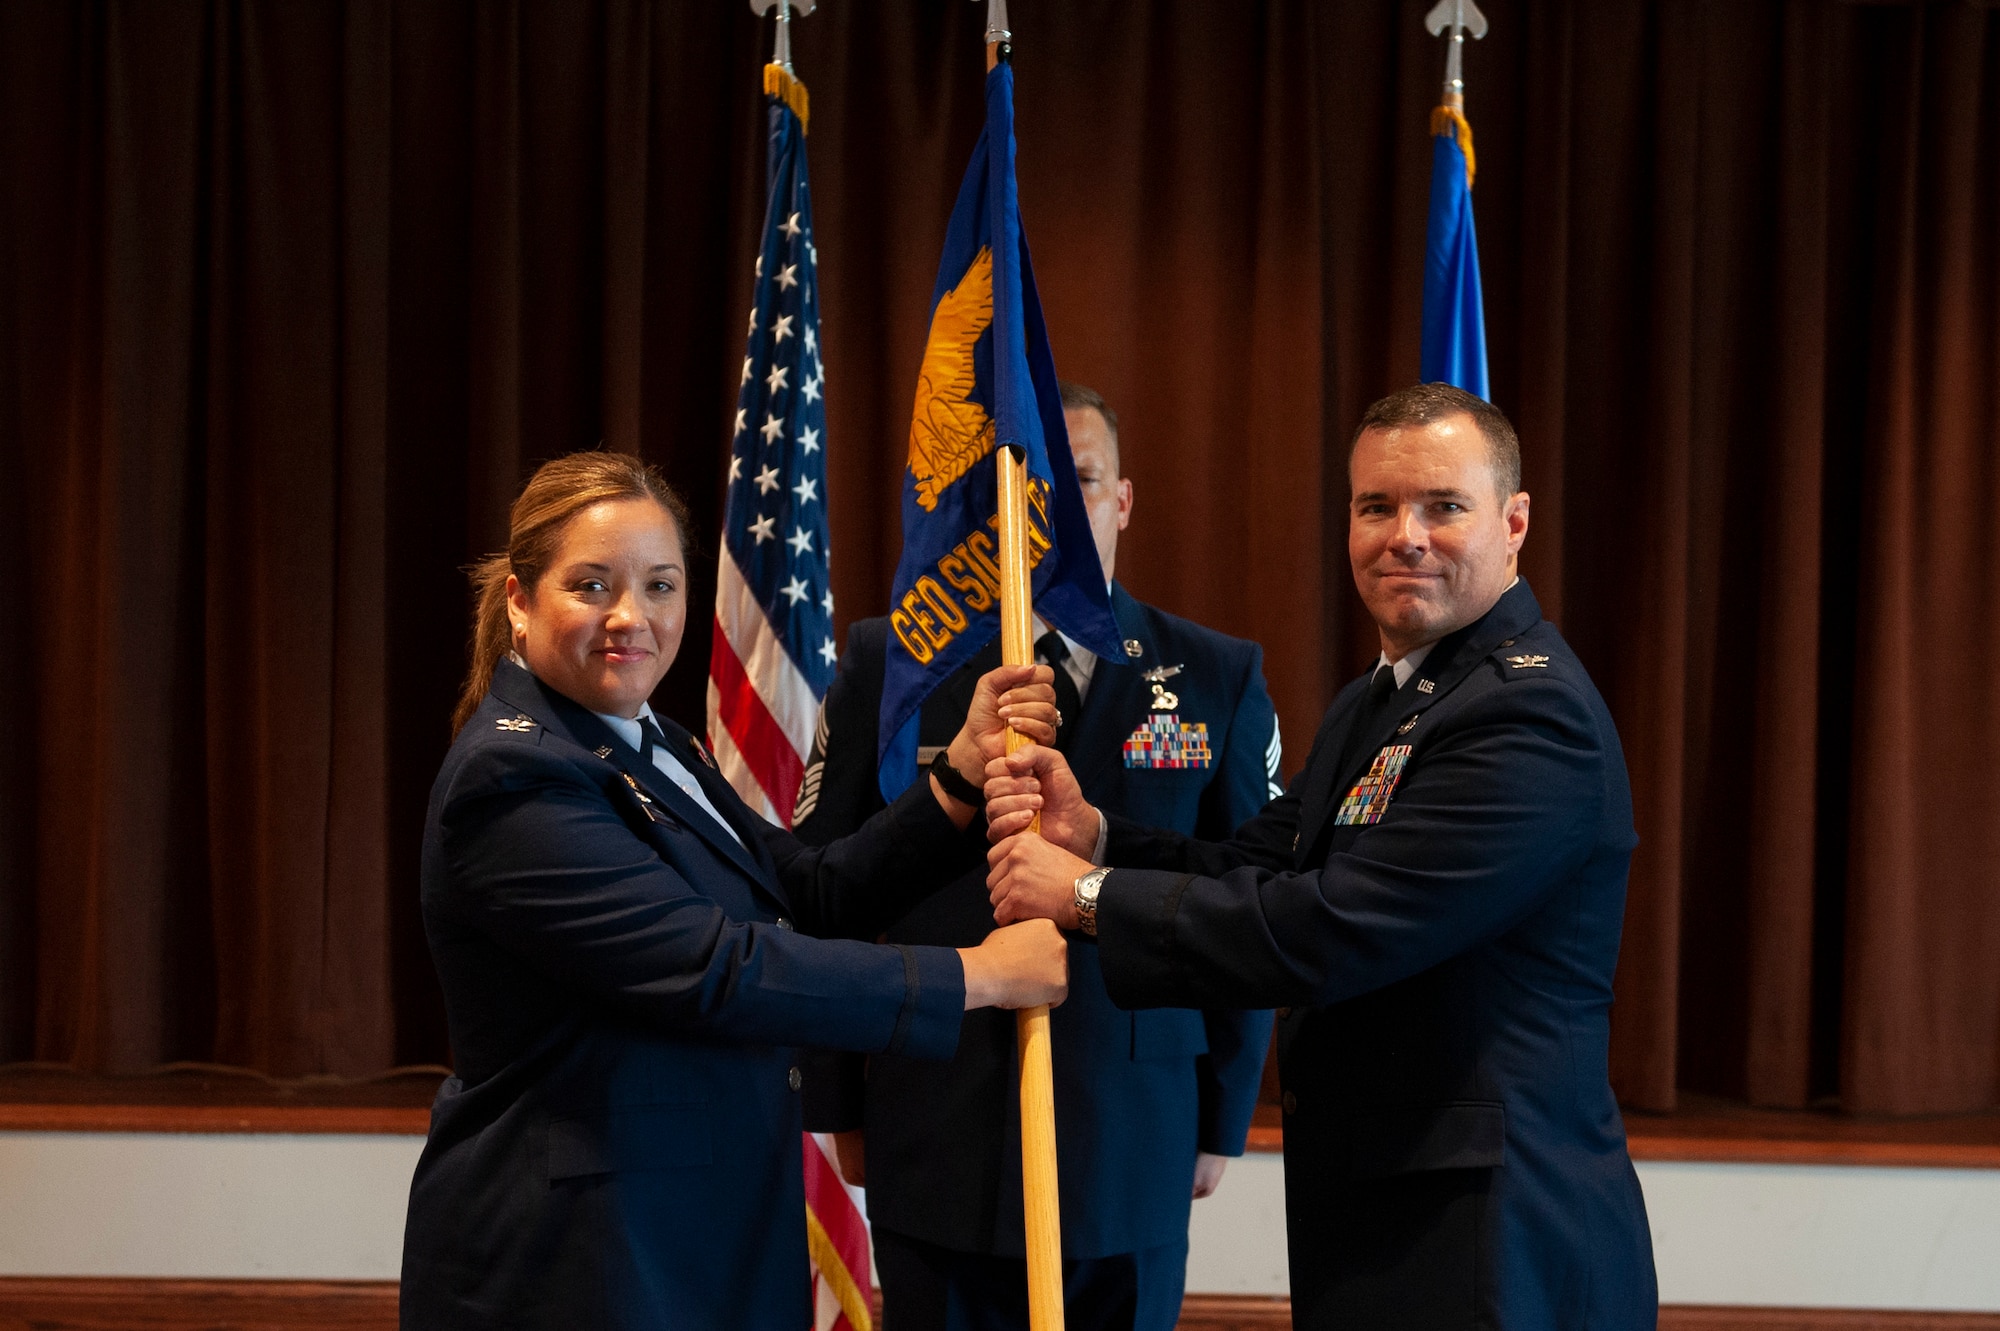 Col. Brandon Shade, incoming Geospatial and Signatures Intelligence Group commander accepts the guidon from Col. Ariel G. Batungbacal, National Air and Space Intelligence Center commander during the groups change of command ceremony at Wright-Patterson Air Force Base, Ohio, July 25, 2023. A change of command is a military tradition that represents a formal transfer of authority and responsibility for a unit from one commanding officer to another.